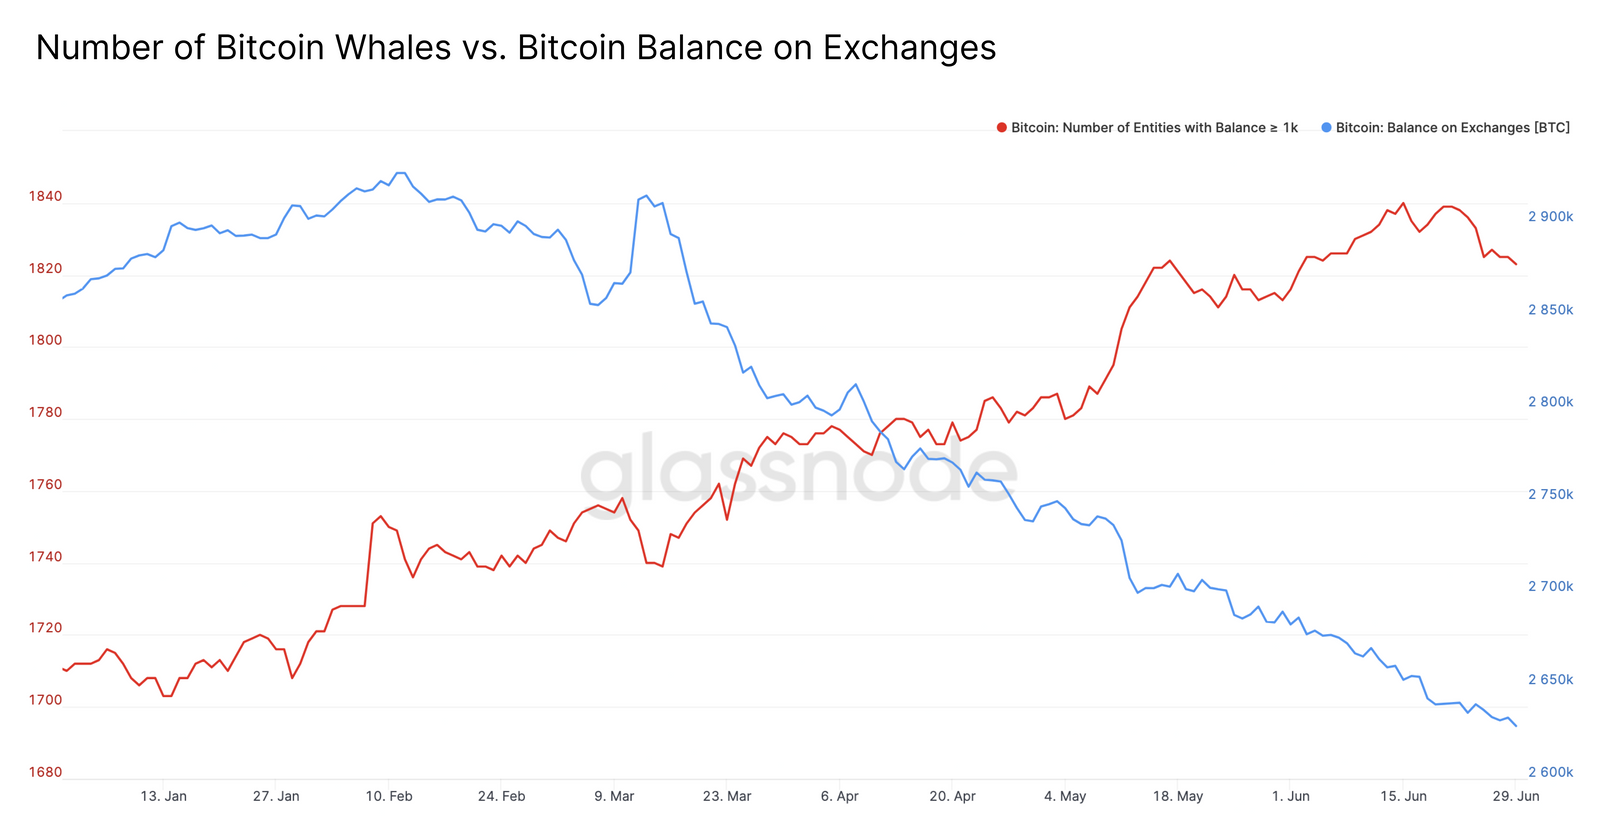 7_whale_numbers_vs_balance_on_exchanges.png